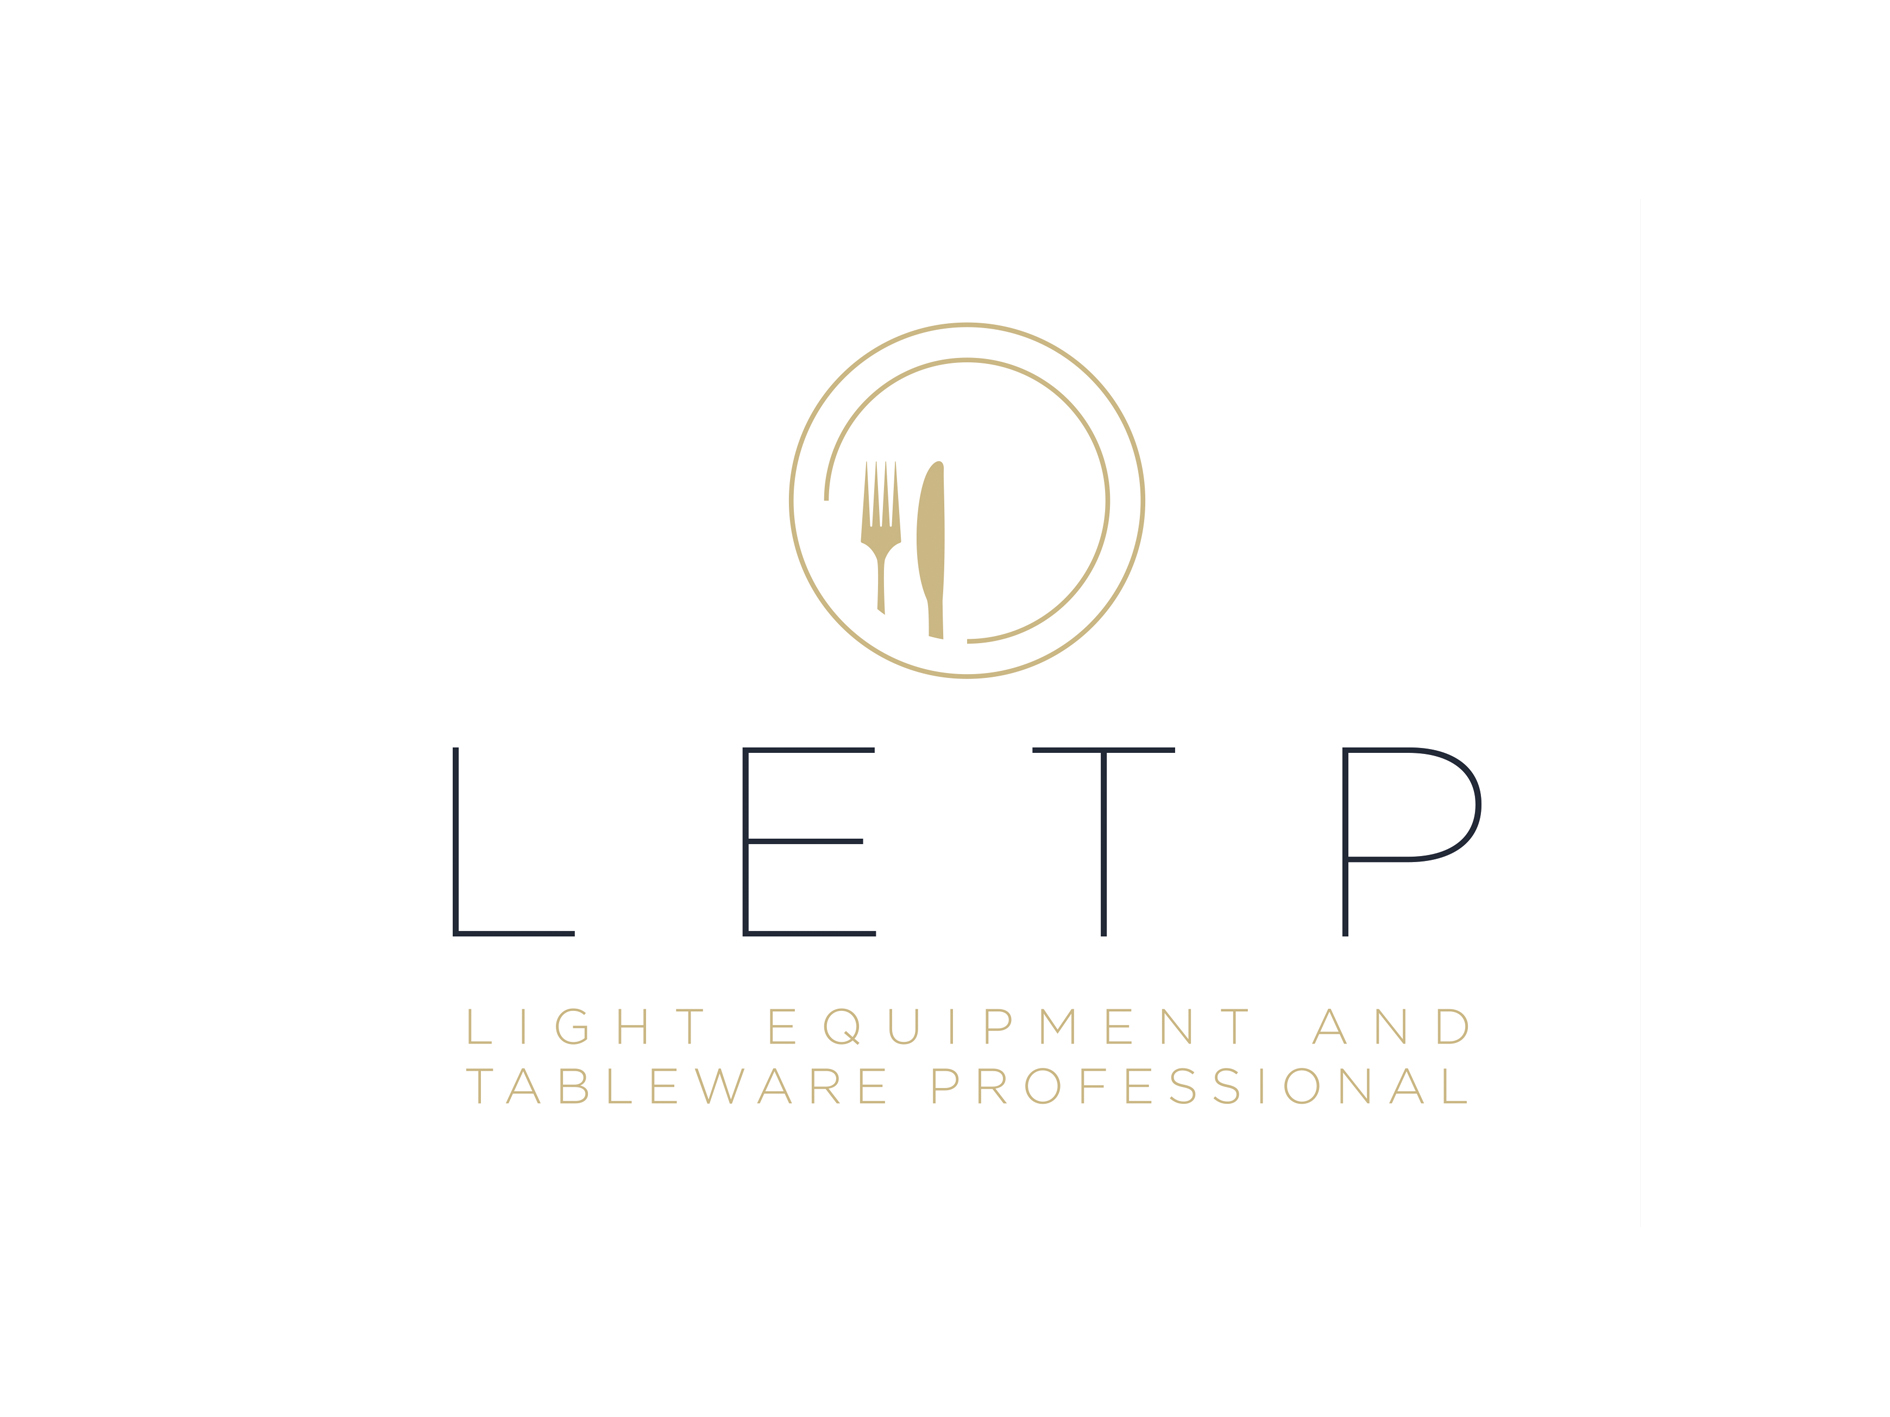 All you need to know about light equipment and tableware